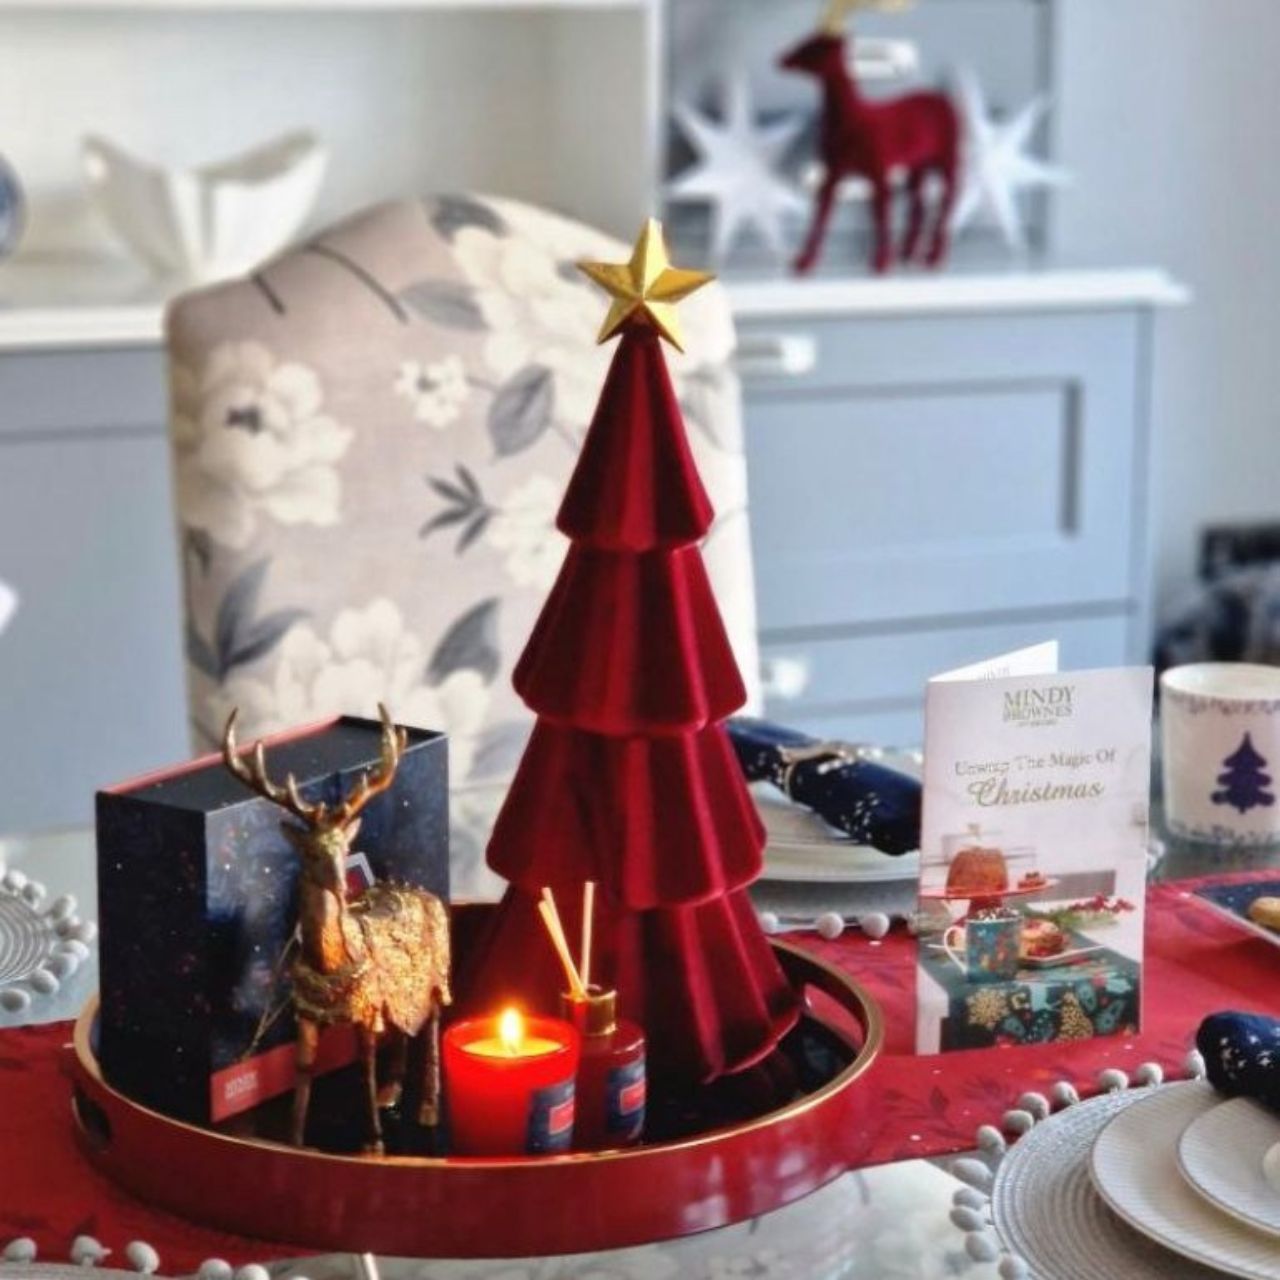 Festive Night Tray by Mindy Brownes  A stunning circular tray, with a deep red surround, gold rim, and an evening Christmas floral design finished in deep lavender, with pops of red. An ideal styling accessory this Christmas season.